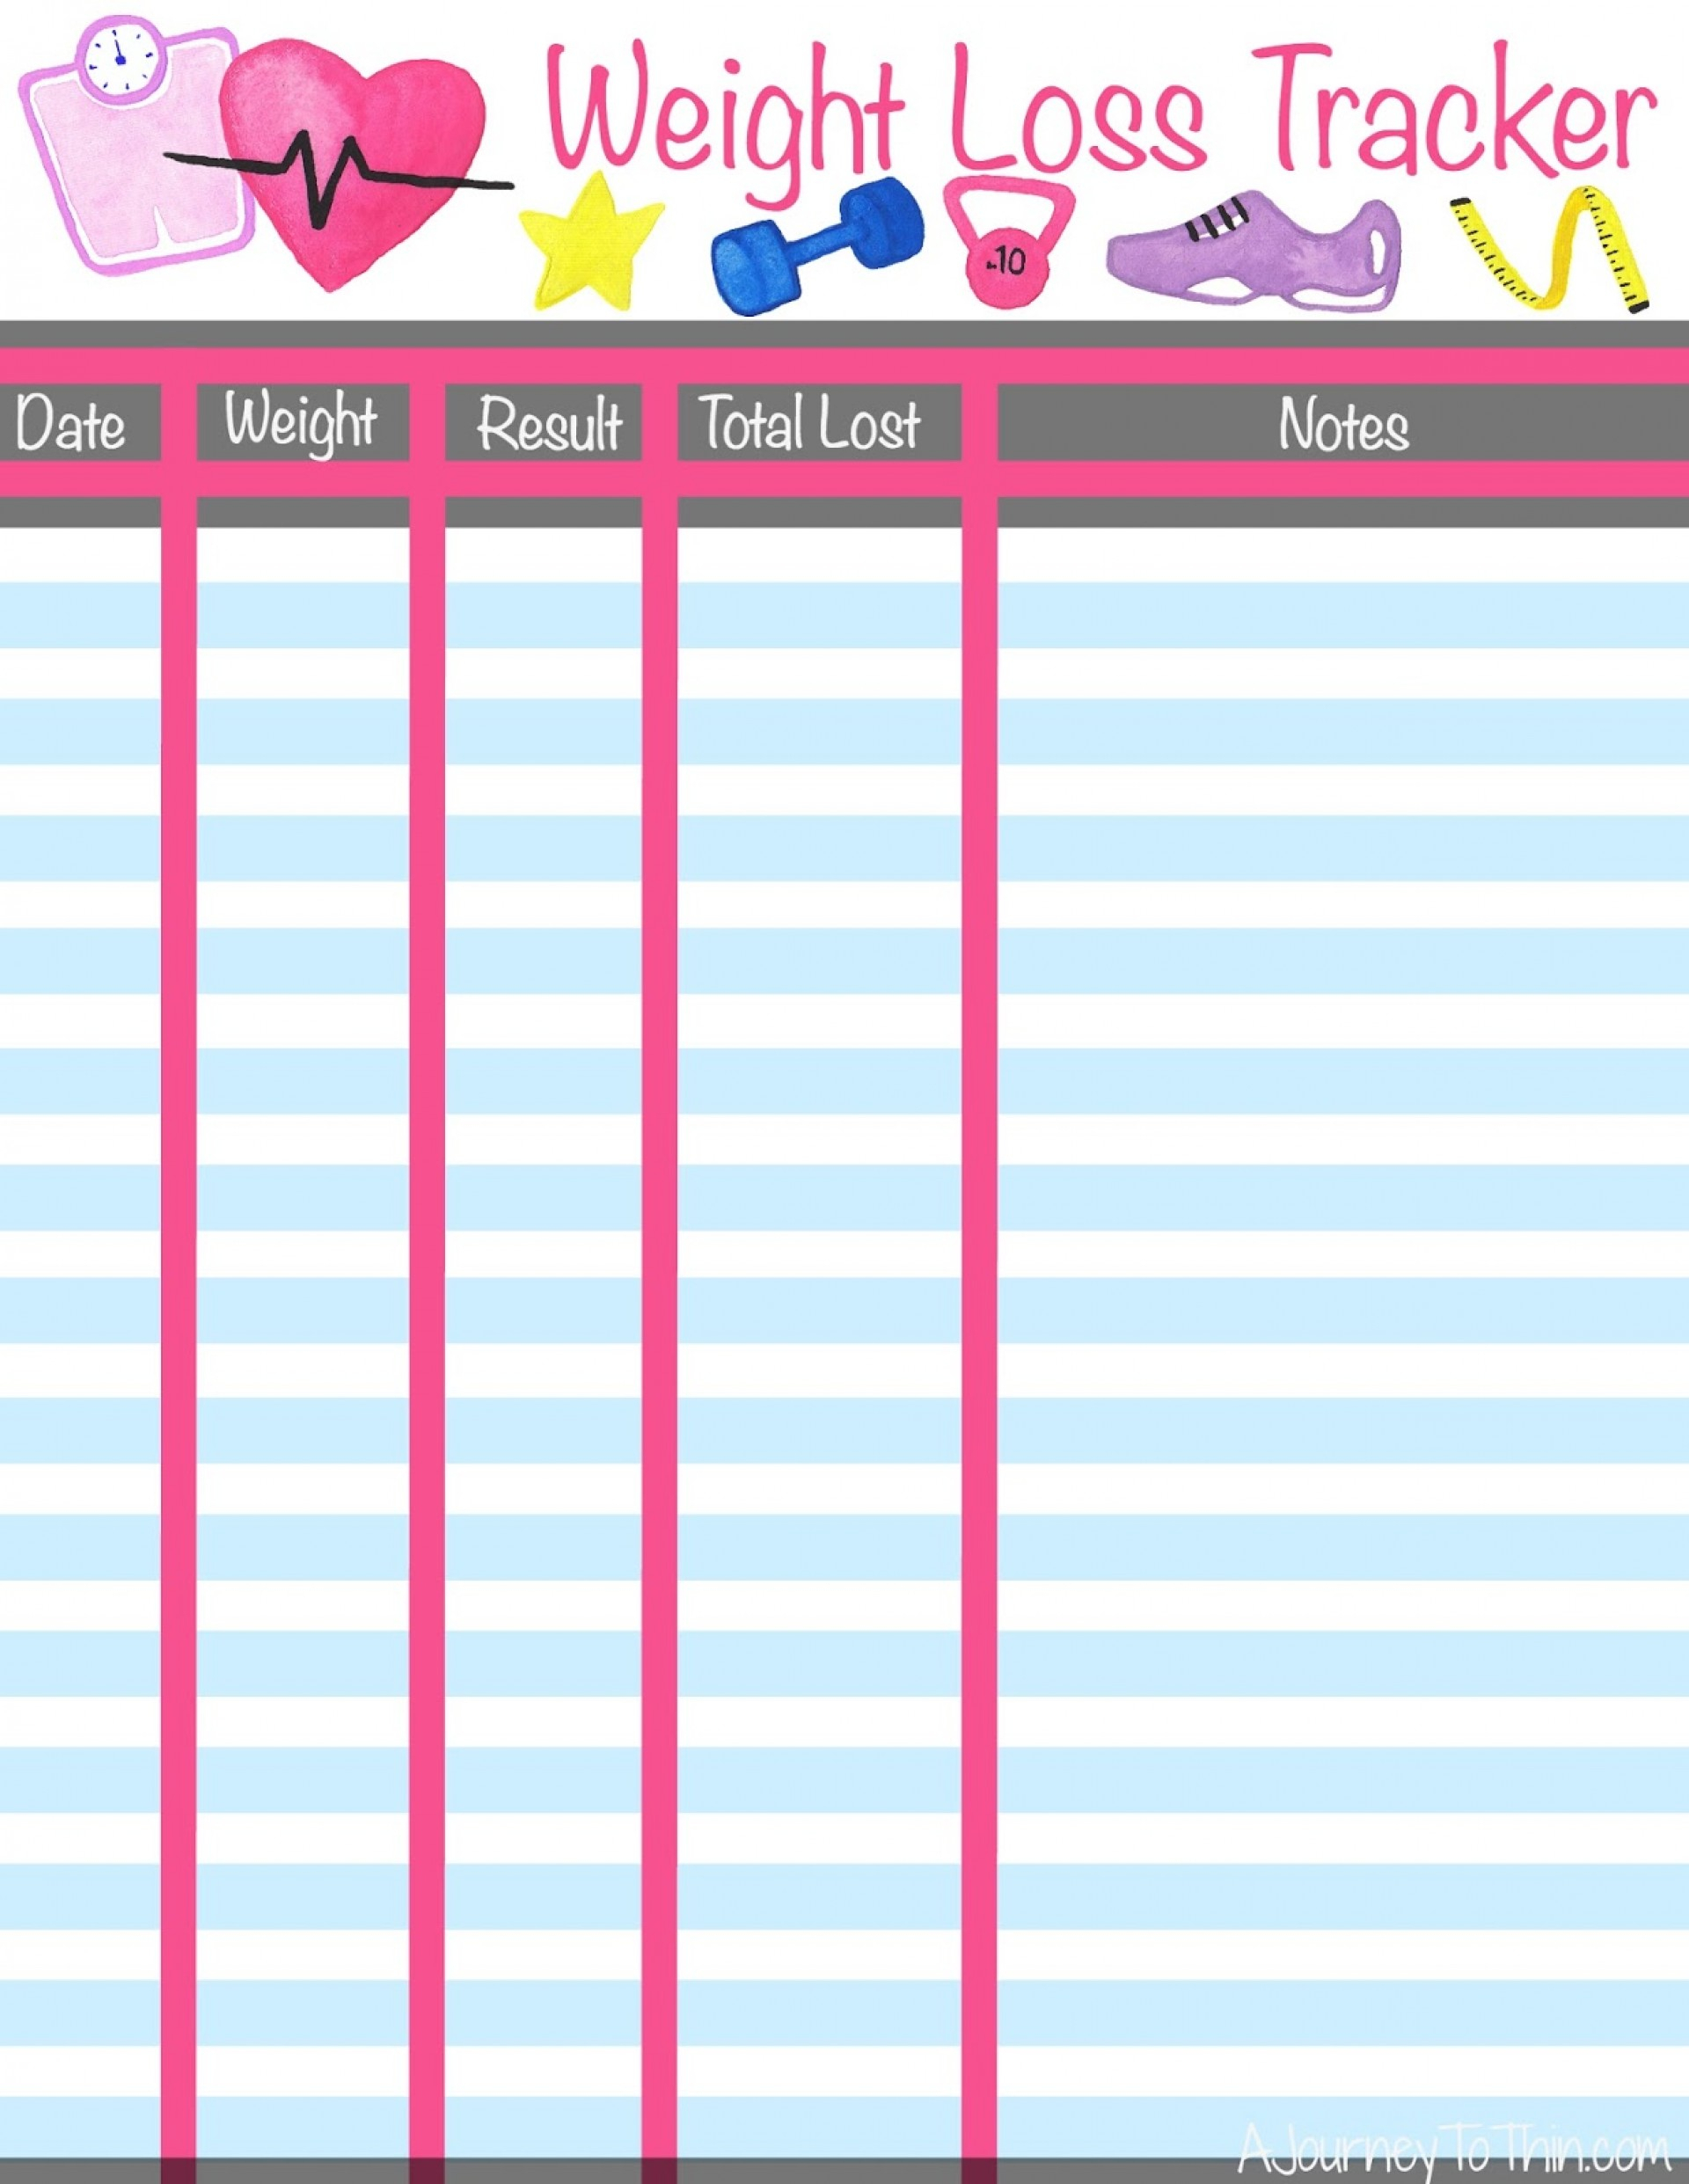 excel weight tracker